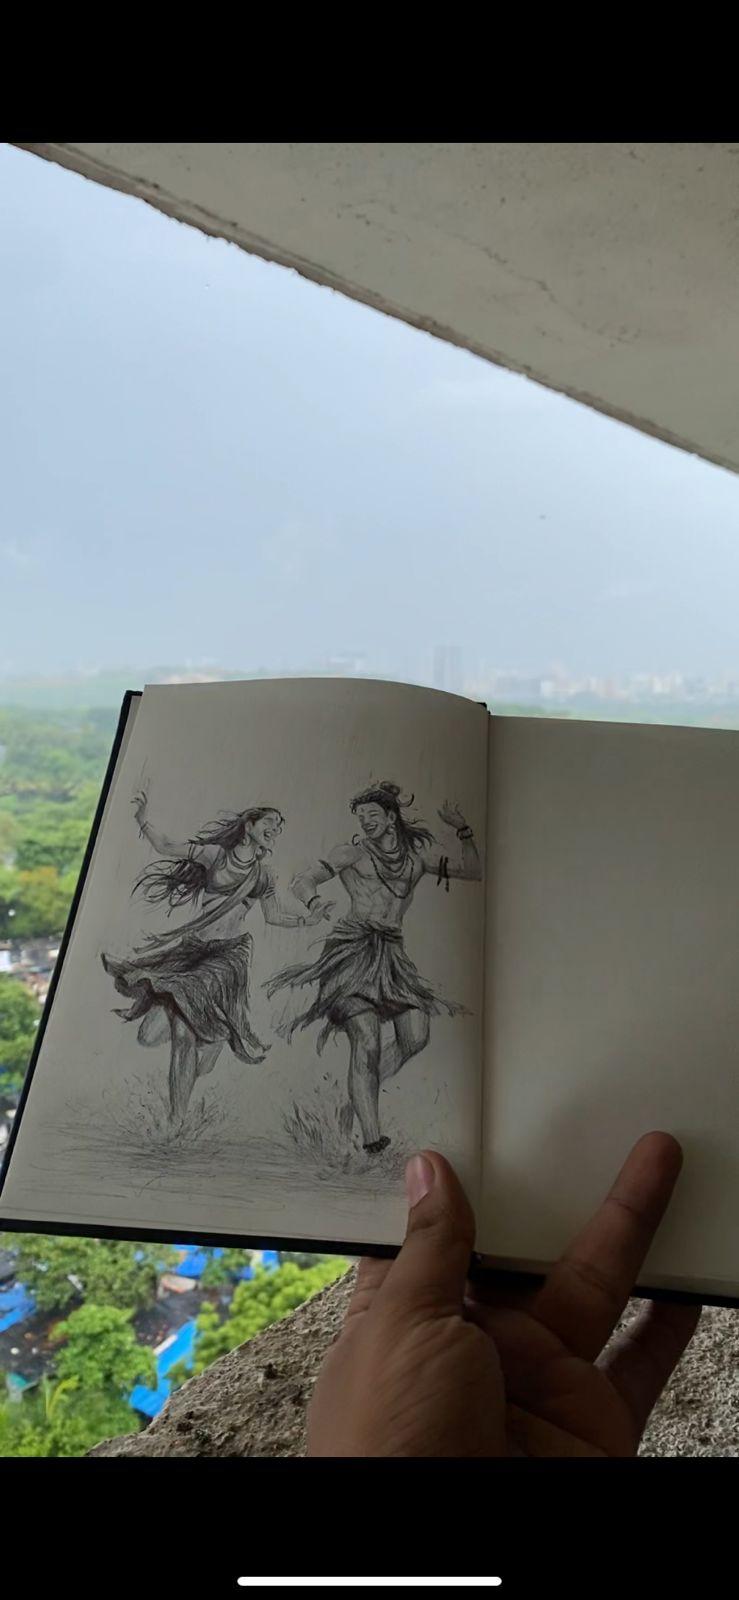 Experience the Magic of Art with Parvesh's Shiv-Parvati Dancing in the Rain Pen Sketch